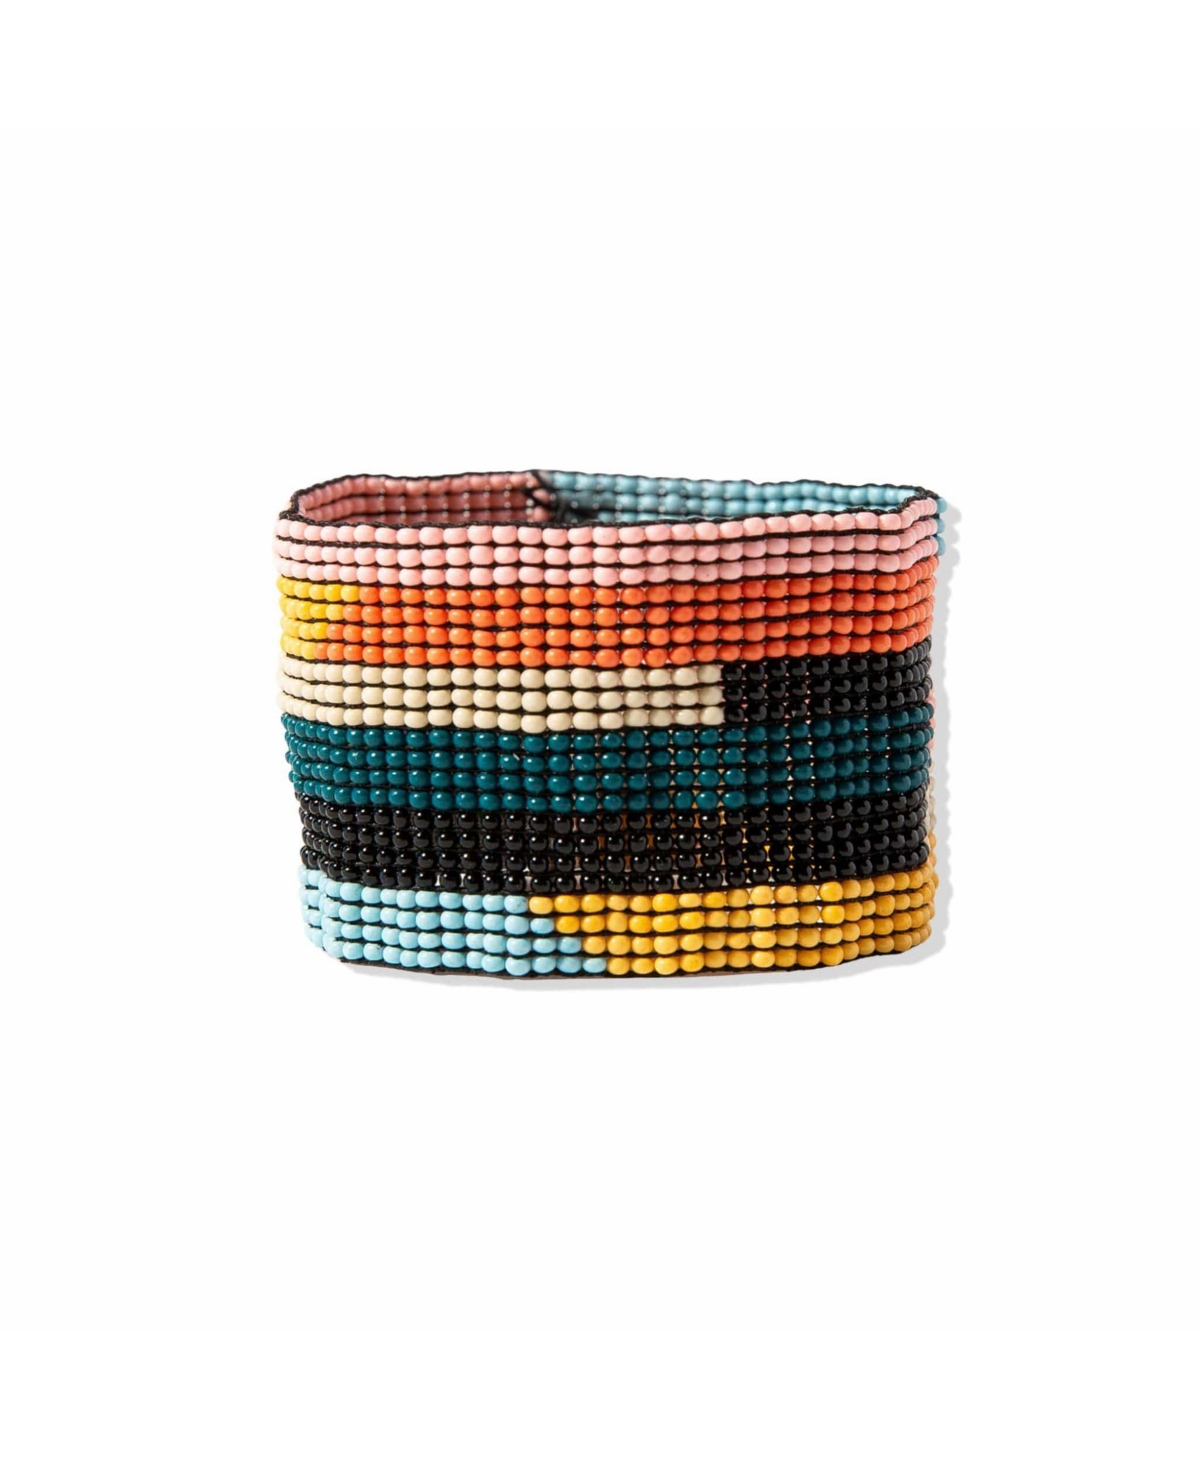 Penelope Beaded Stretch Bracelet Checkered - Neon and white